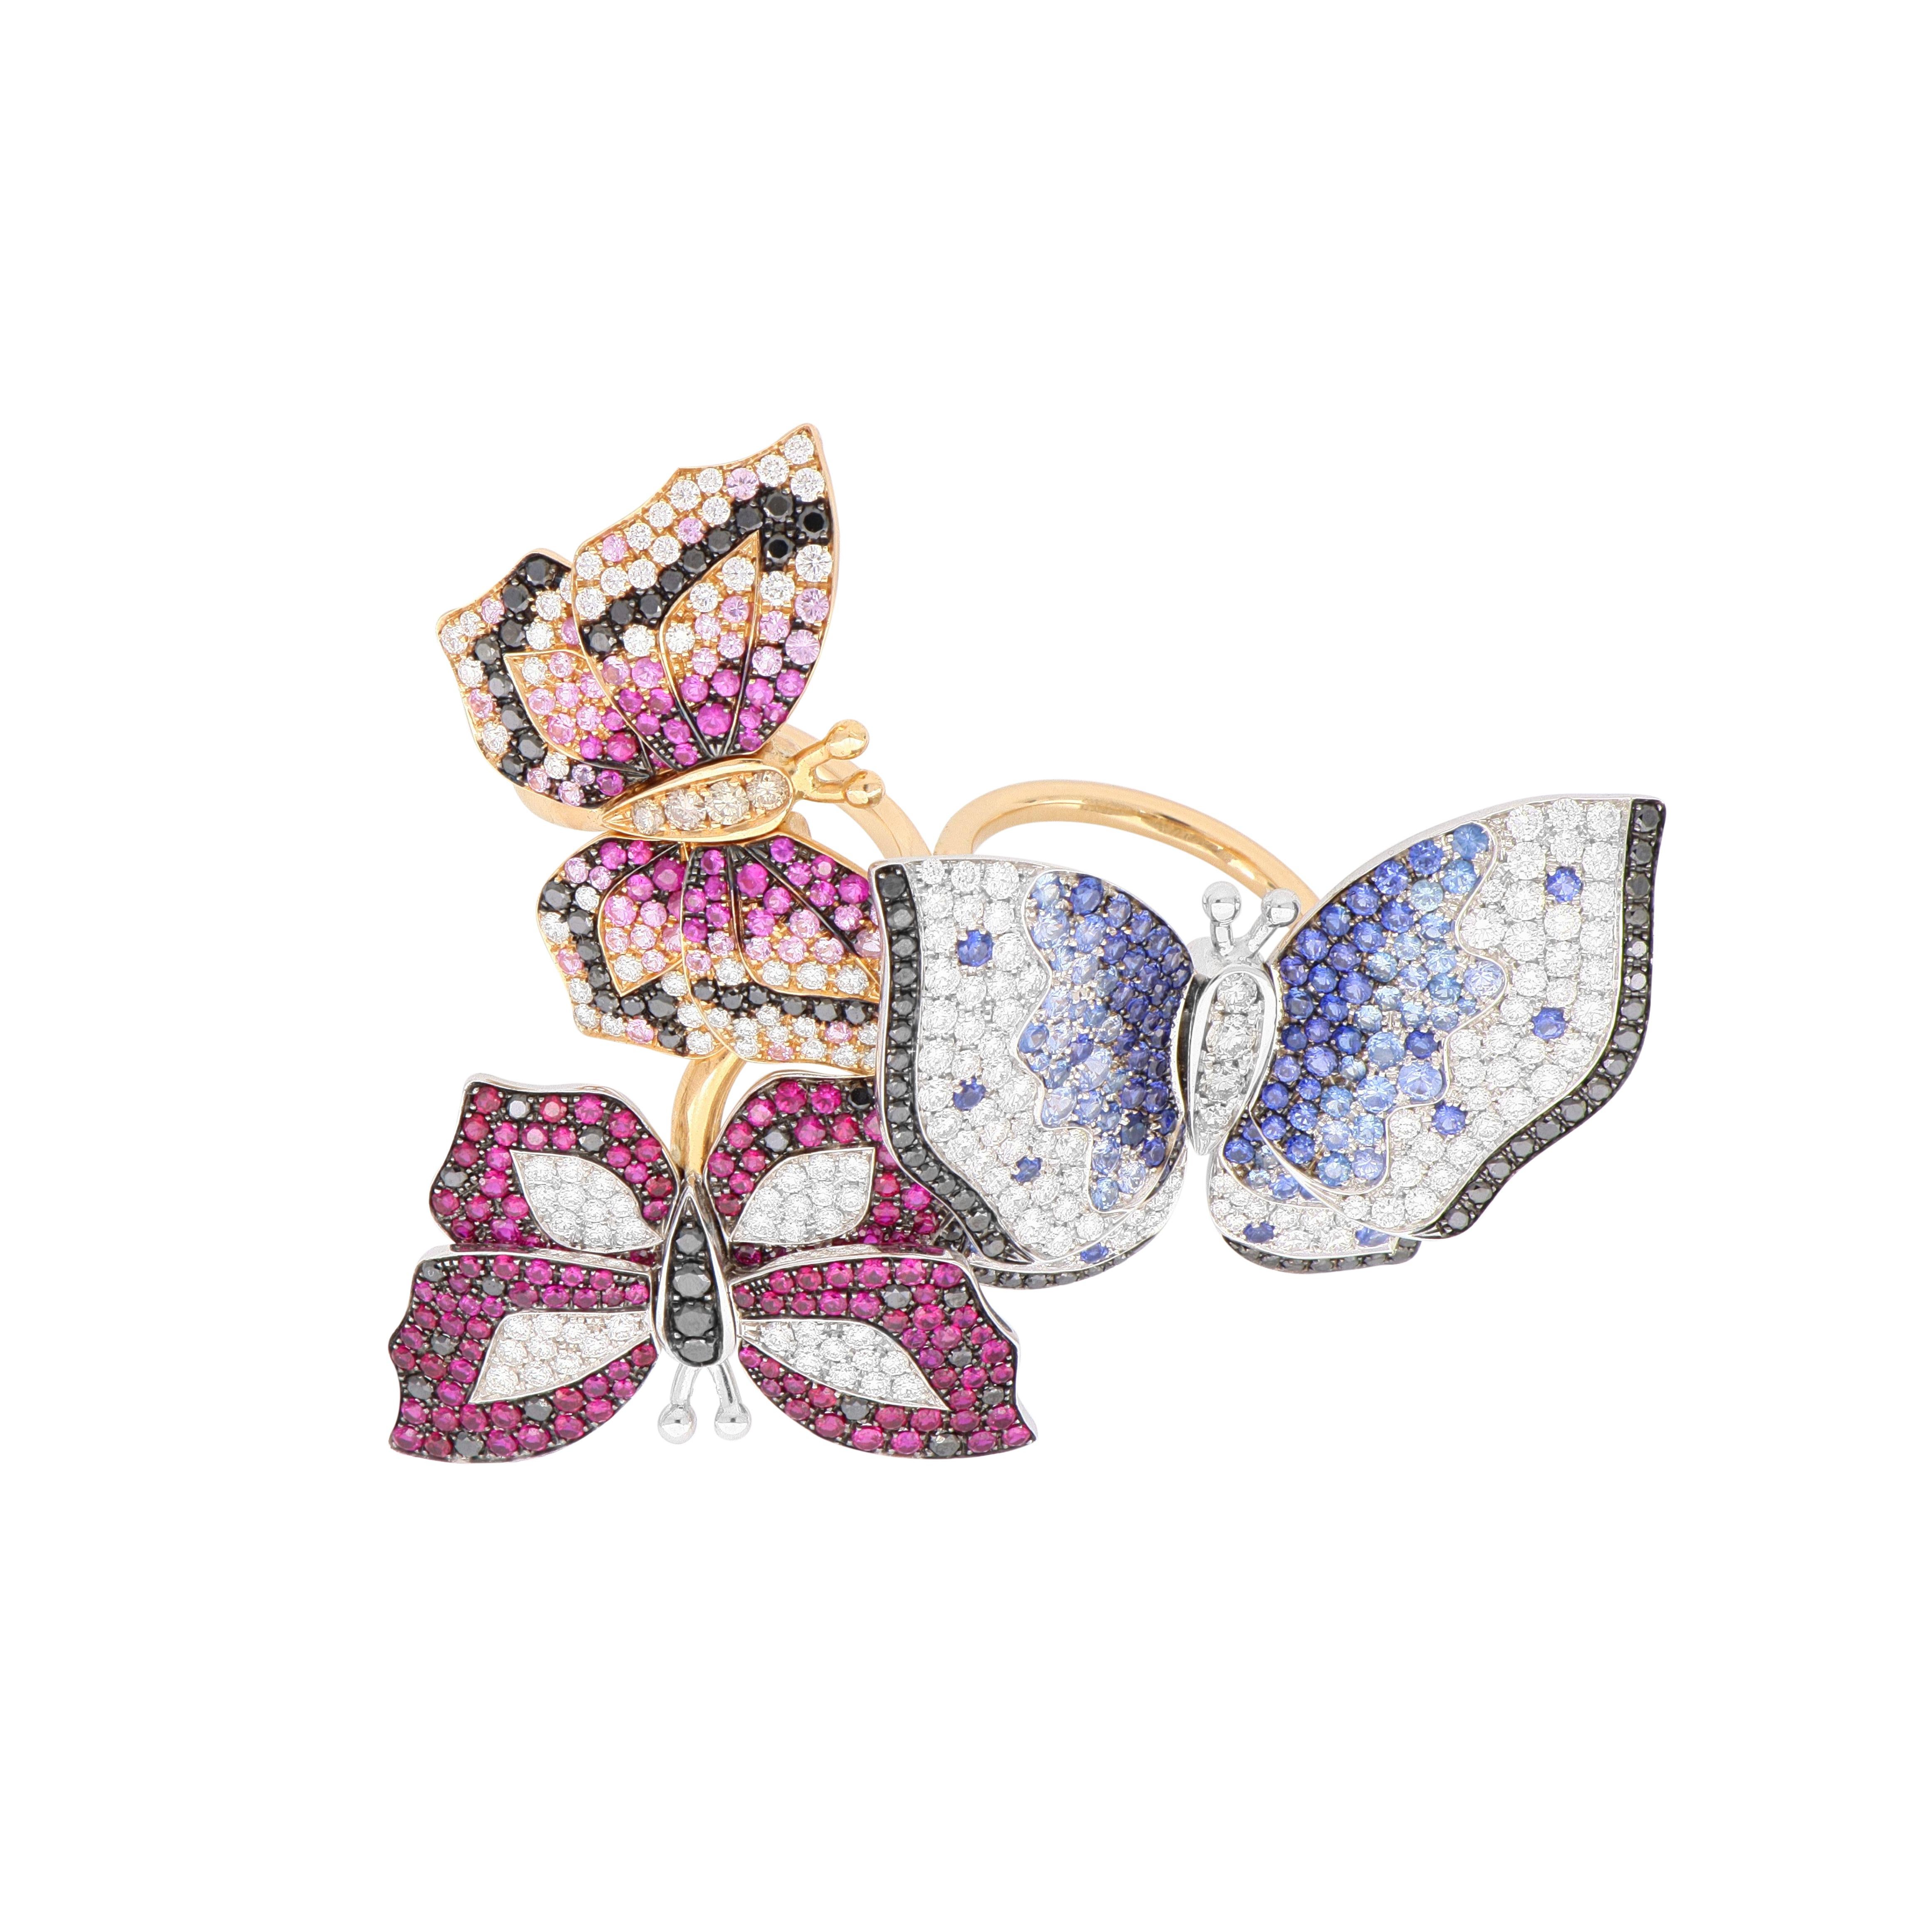 This is the right ring to choose if you're after a spectacular, jaw-dropping effect that will be remembered. Crafted in 18 Kt yellow gold, this fashion ring features 3 butterflies that are completely covered in different-shade rubies, sapphires, and